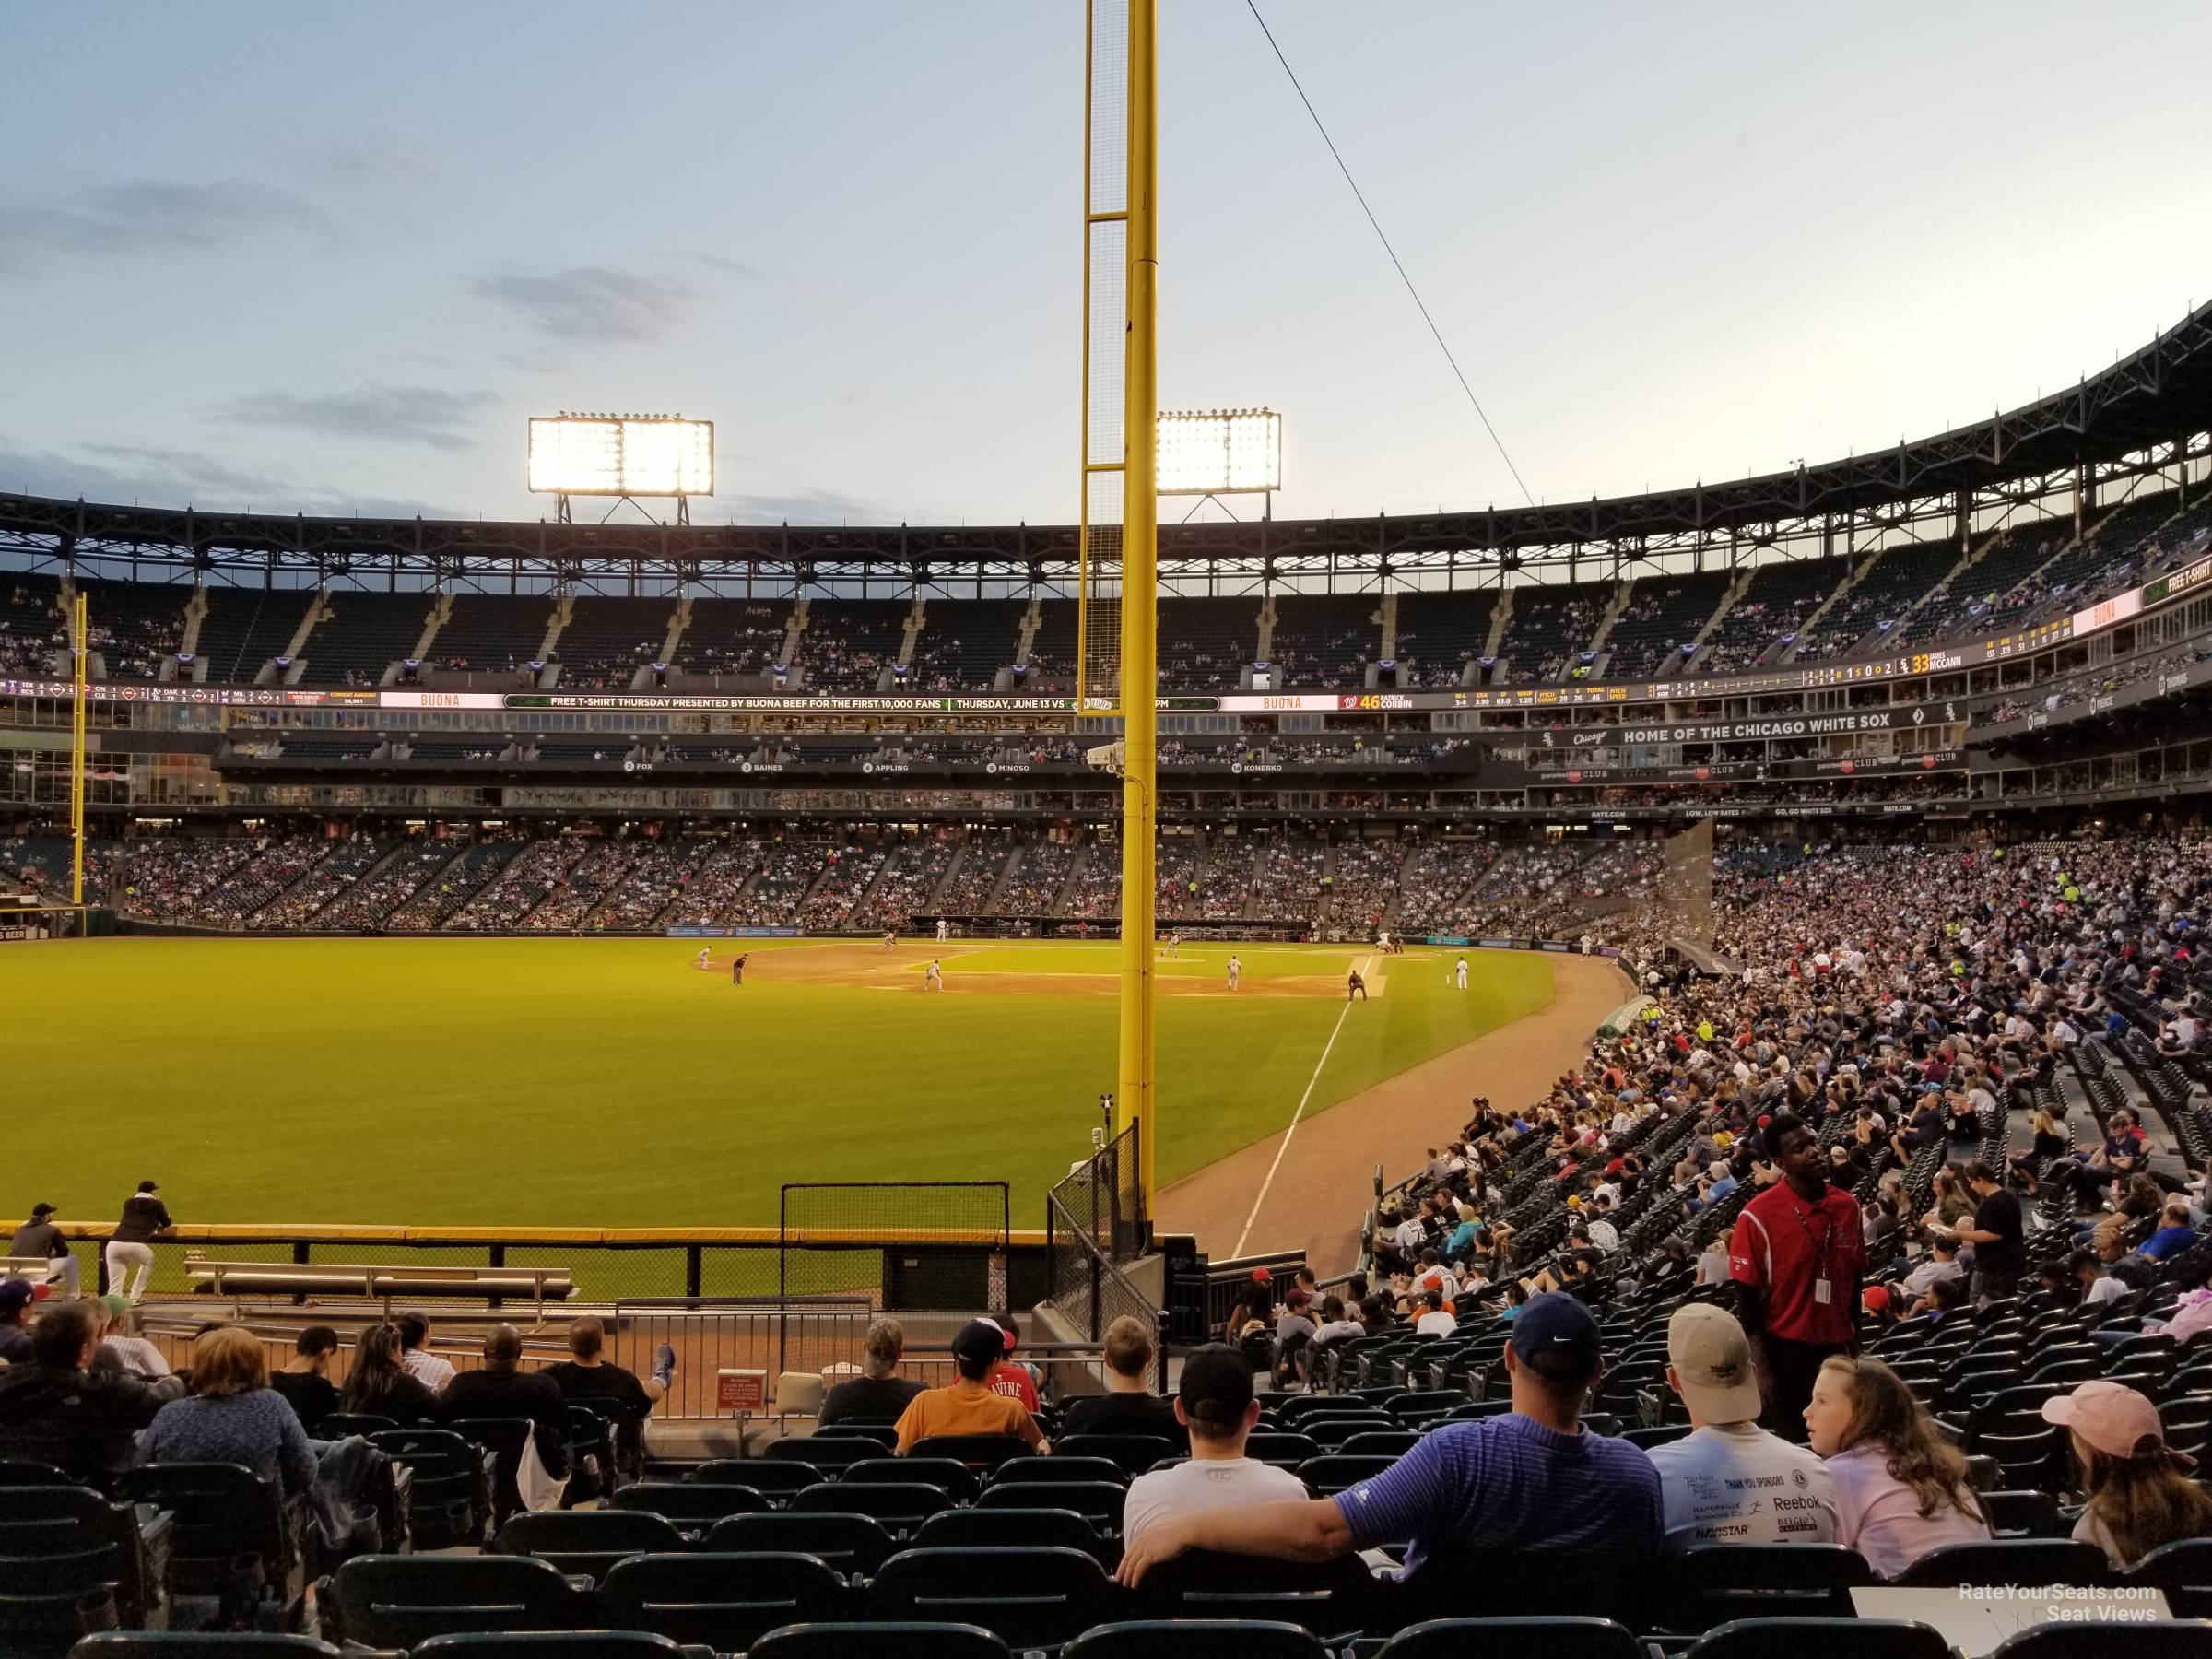 section 156, row 21 seat view  - guaranteed rate field